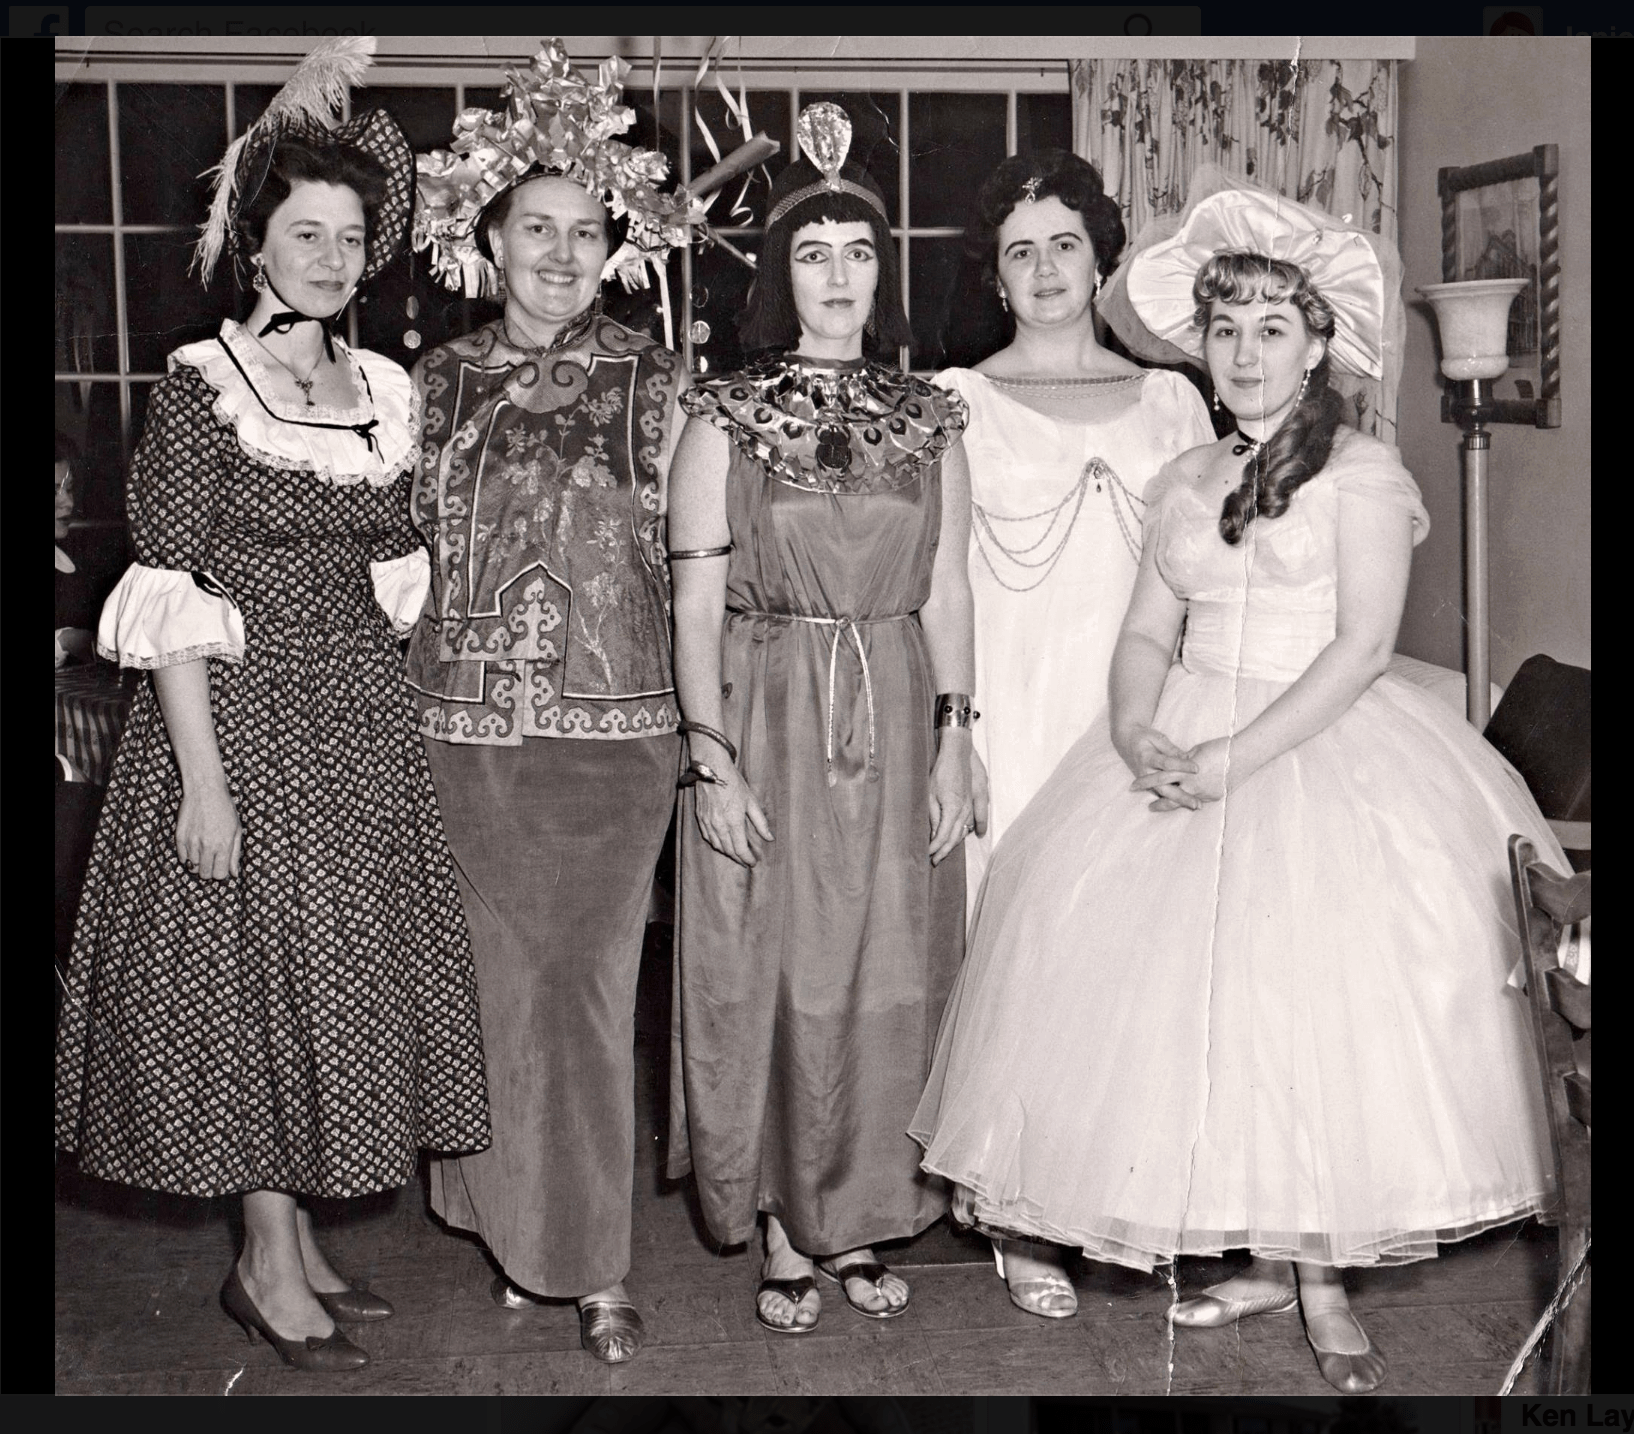 1964 costumes in Tunkhannock